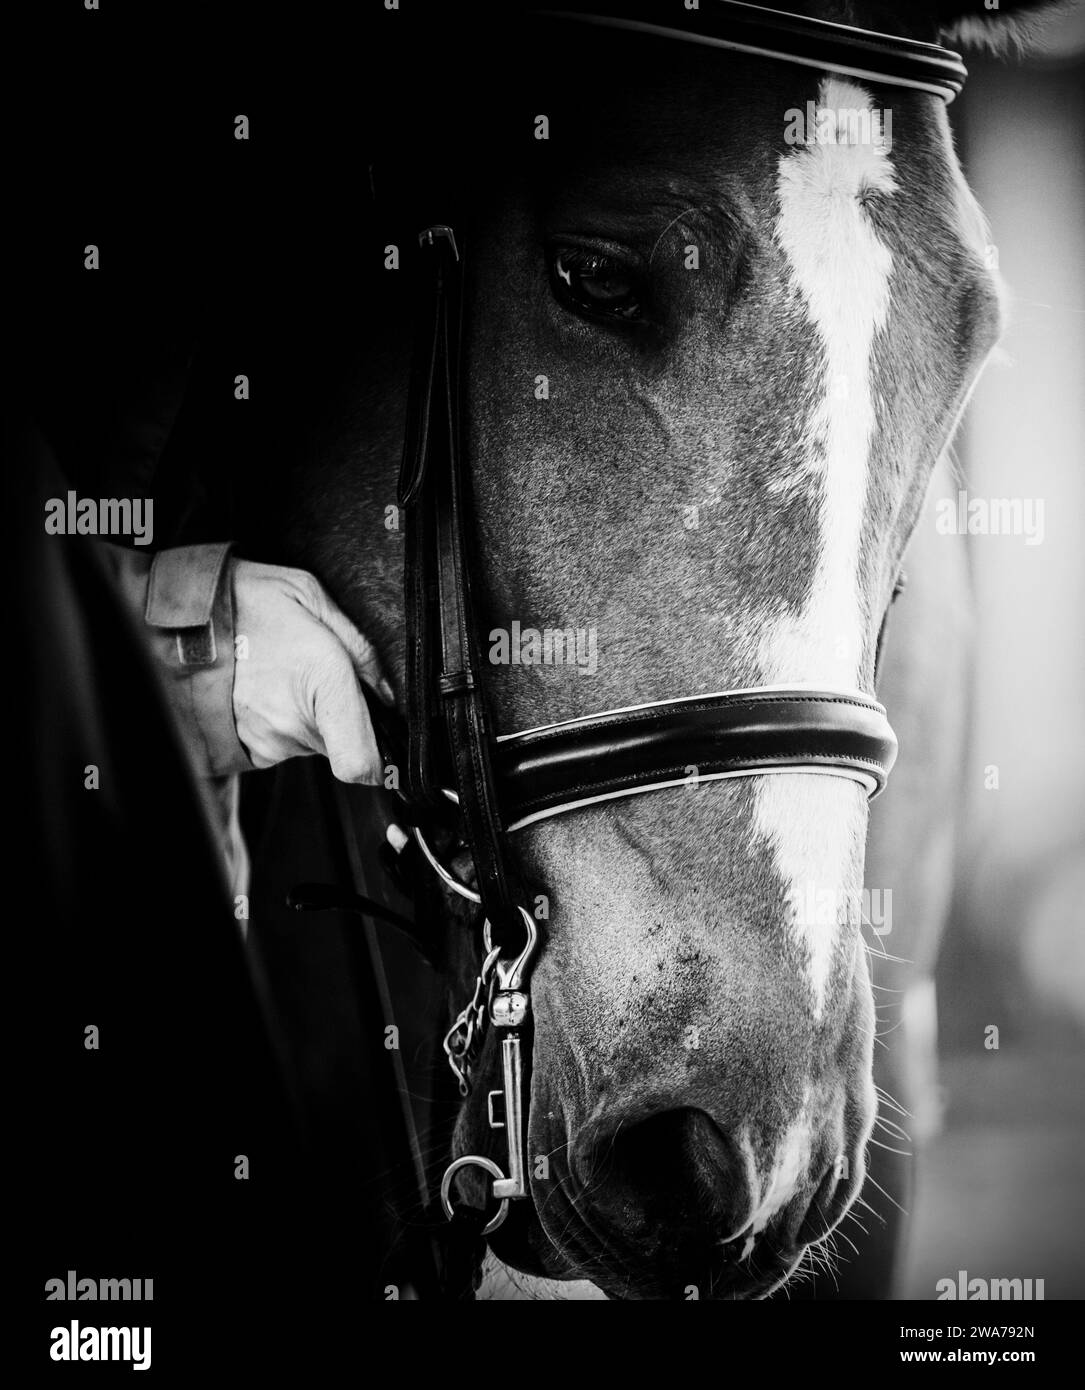 A black-and-white portrait of a horse, which a horse breeder puts a bridle on its muzzle. Equestrian sports and horse riding. Stock Photo